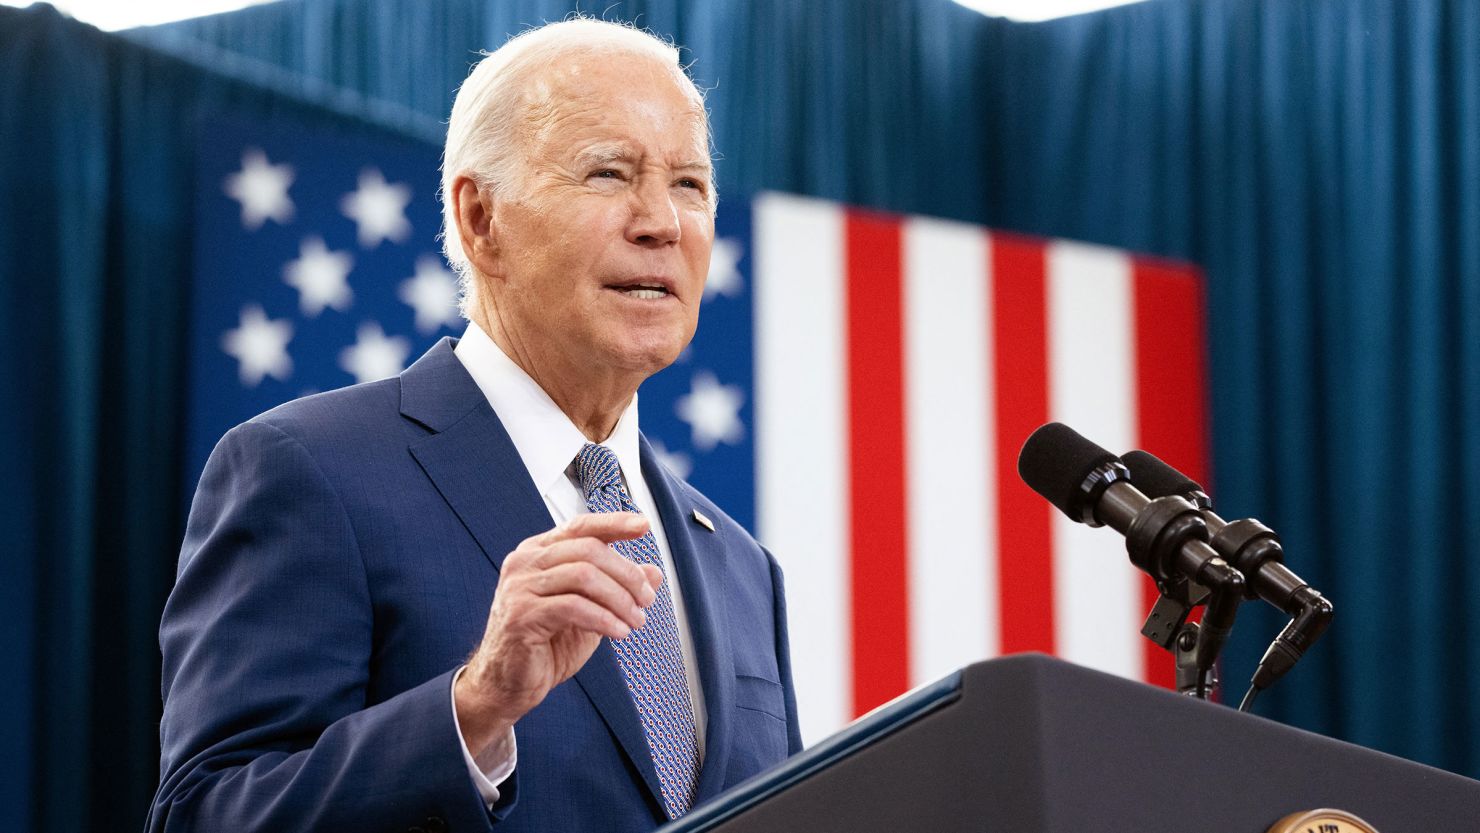 Biden wins New Hampshire primary, CNN projects, with successful write